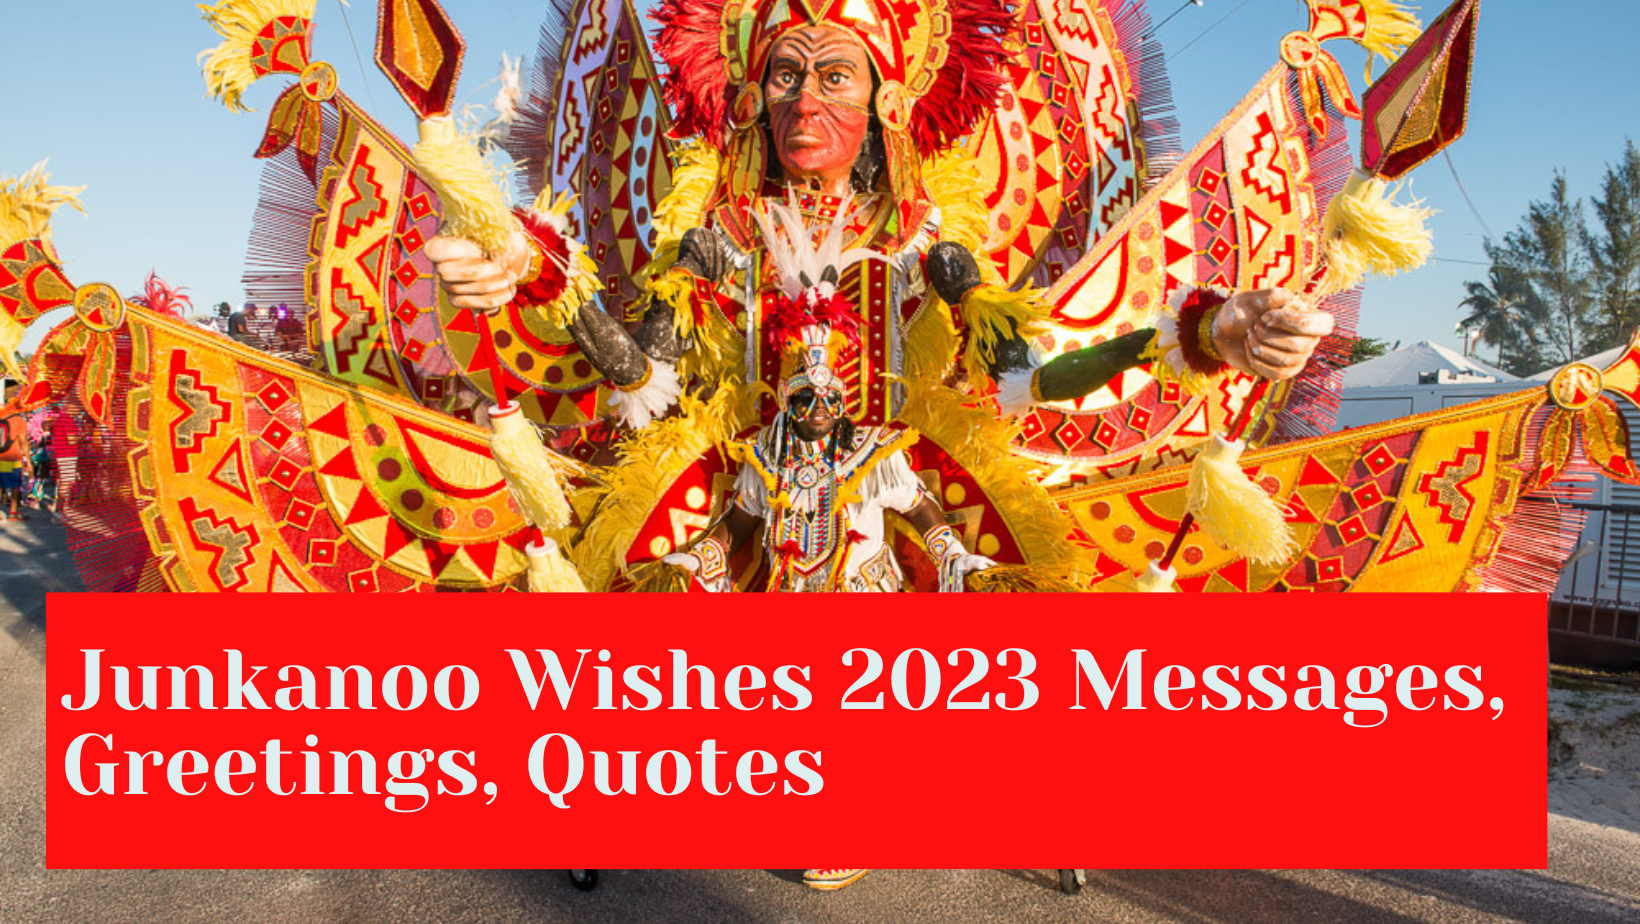 Junkanoo Wishes 2023 Messages, Greetings, Quotes